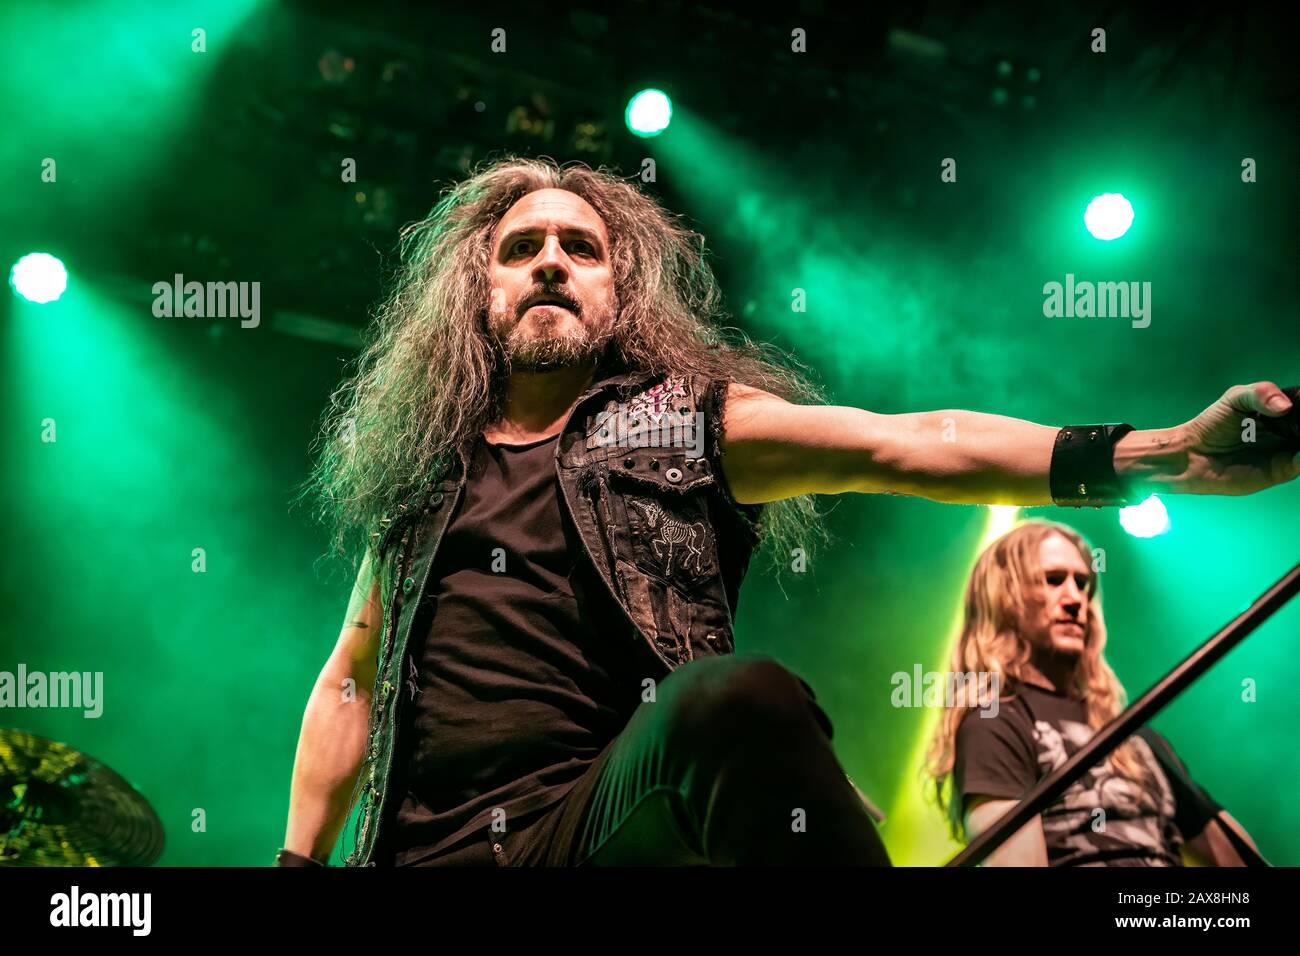 Oslo, Norway. 08th, February 2020. The American thrash metal band Death Angel performs a live at Rockefeller in Oslo. Here vocalist Mark Osegueda is seen live on stage. (Photo credit: Gonzales Photo - Terje Dokken). Stock Photo